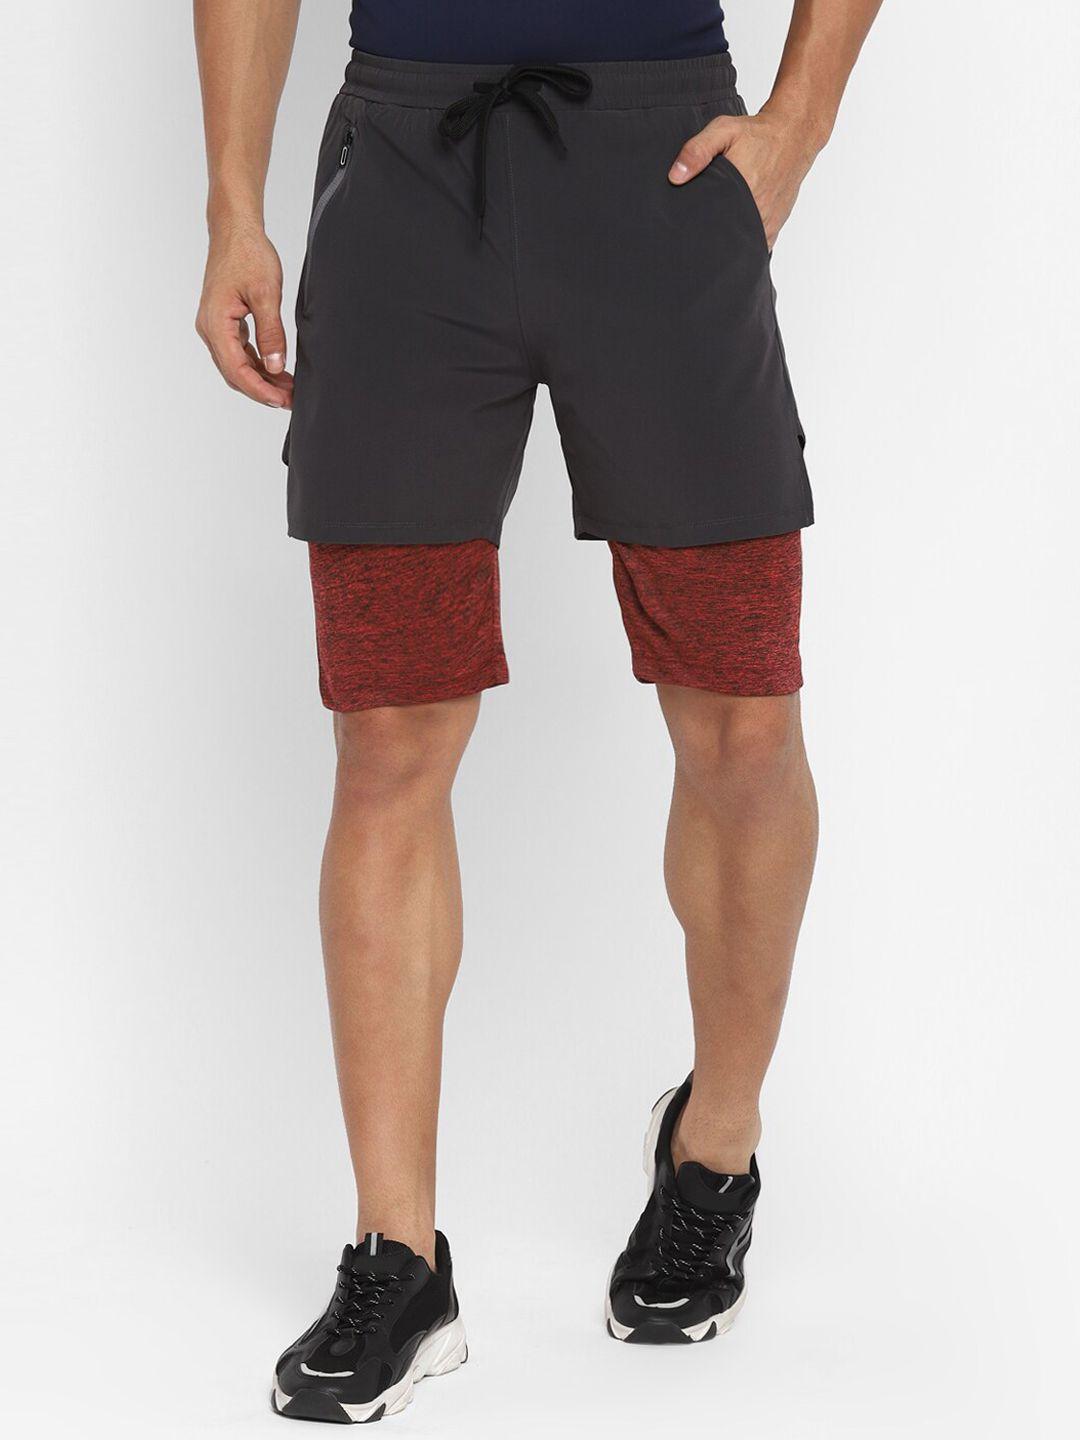 off limits men charcoal solid training or gym shorts